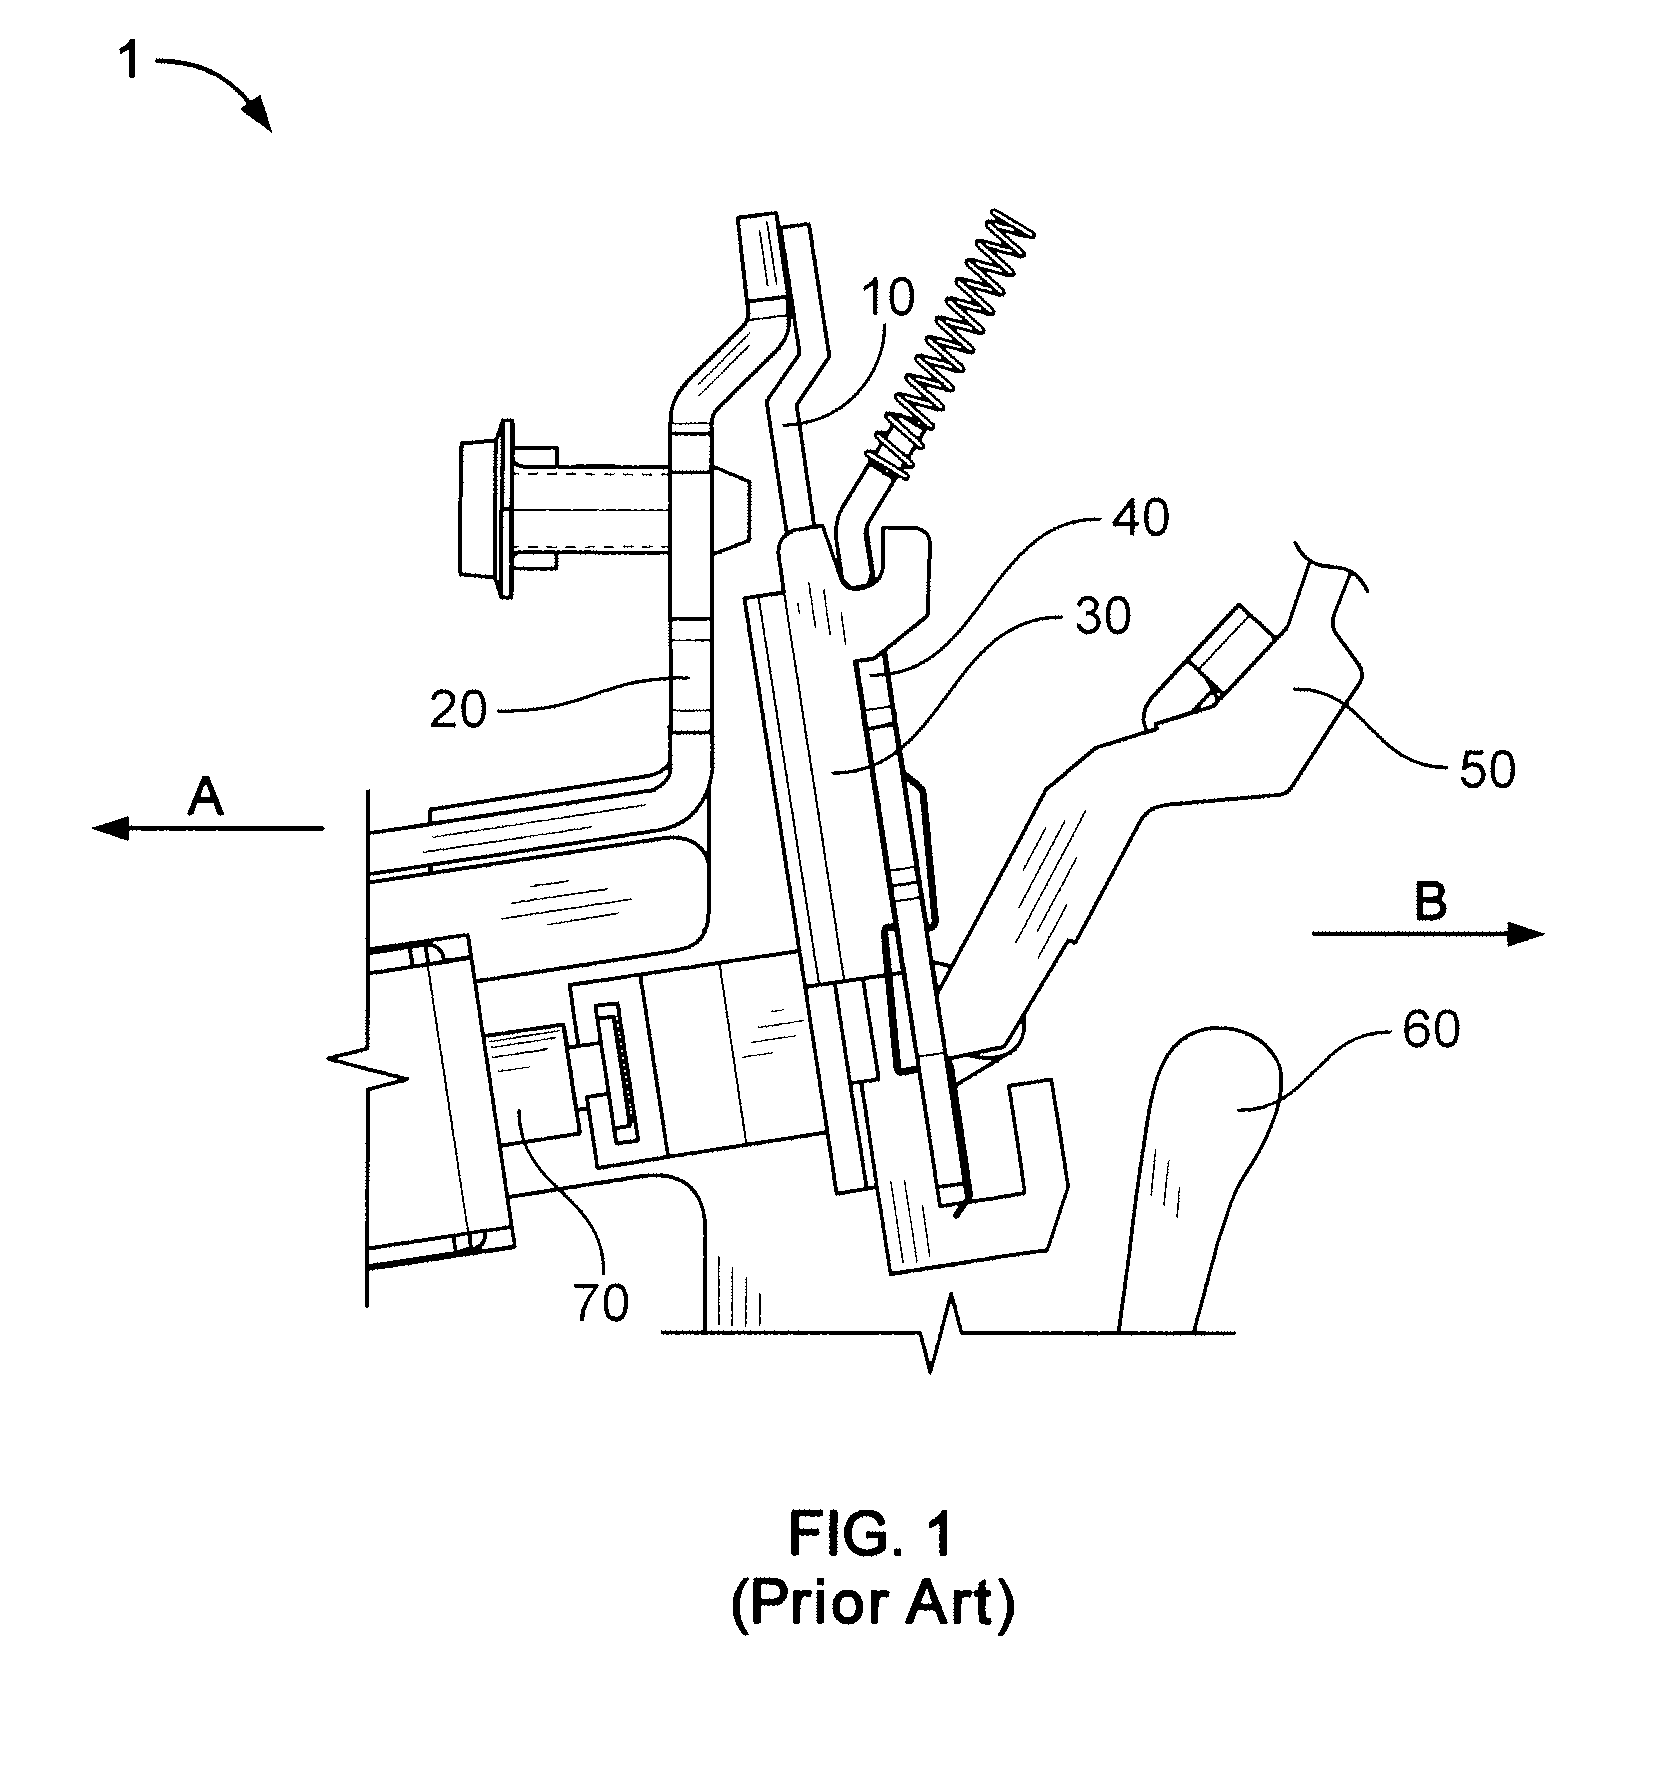 Circuit breaker having reduced auxiliary trip requirements